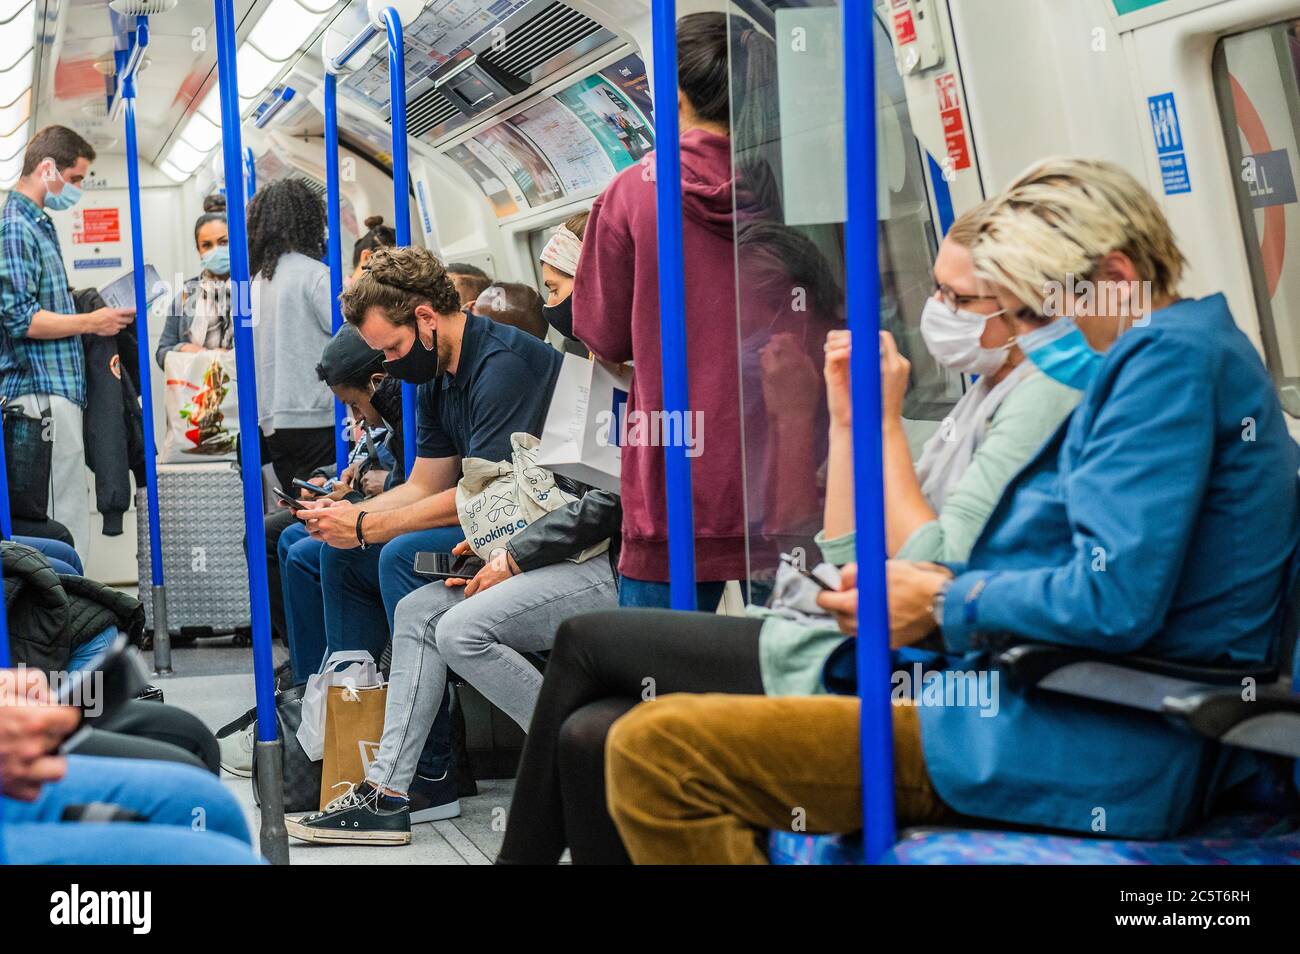 London, UK. 04th July, 2020. The underground is getting busier, on the day the pubs open. Those who do travel nearly all wear masks after they become mandatory on public transport. The 'lockdown' continues for the Coronavirus (Covid 19) outbreak in London. Credit: Guy Bell/Alamy Live News Stock Photo